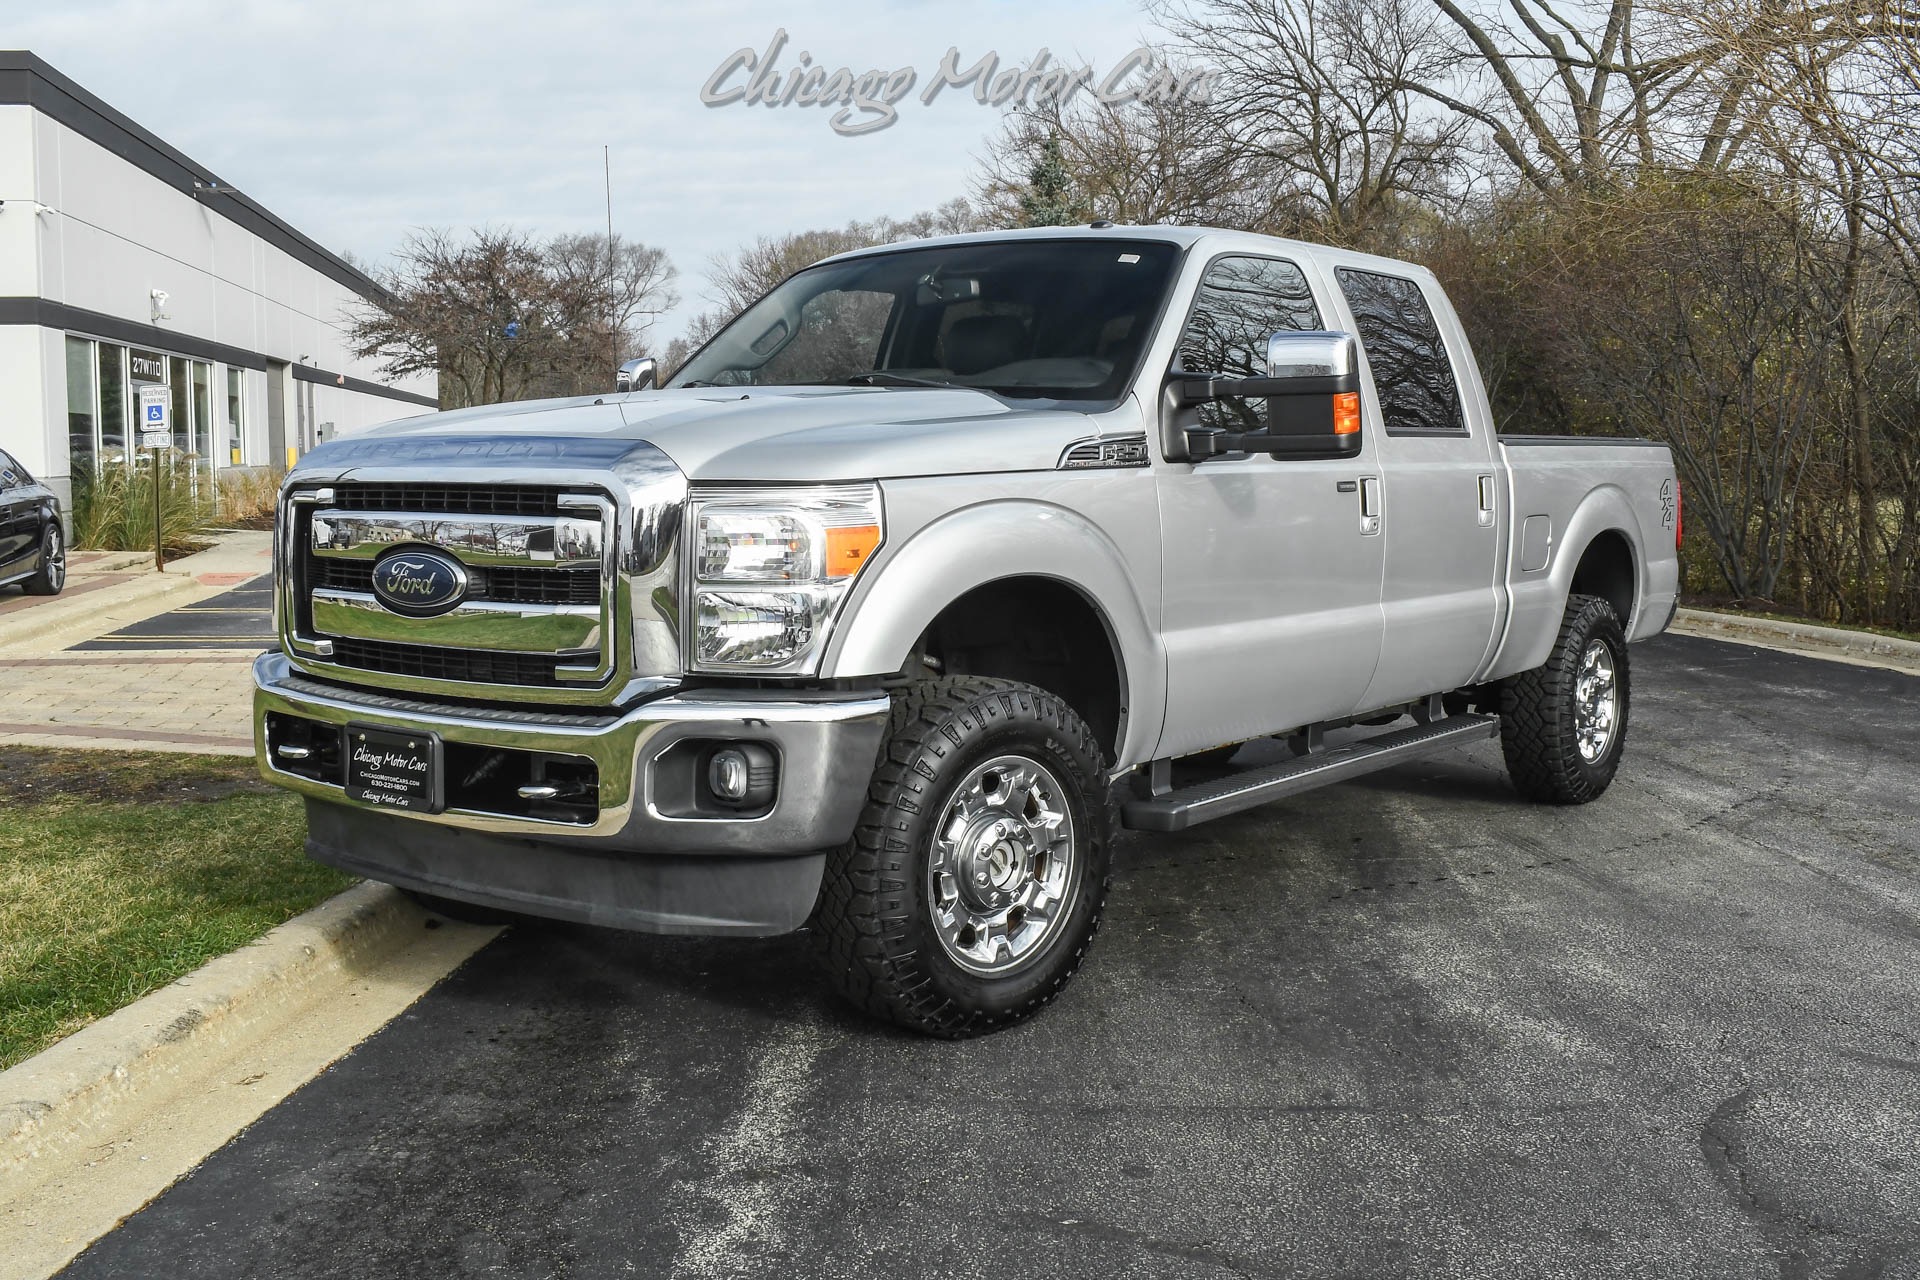 Used 2014 Ford F-250 Super Duty Lariat 4X4 Crew Cab Pickup! 6.2L V8!  Navigation! Chrome Pkg! For Sale (Special Pricing) | Chicago Motor Cars  Stock #19752D